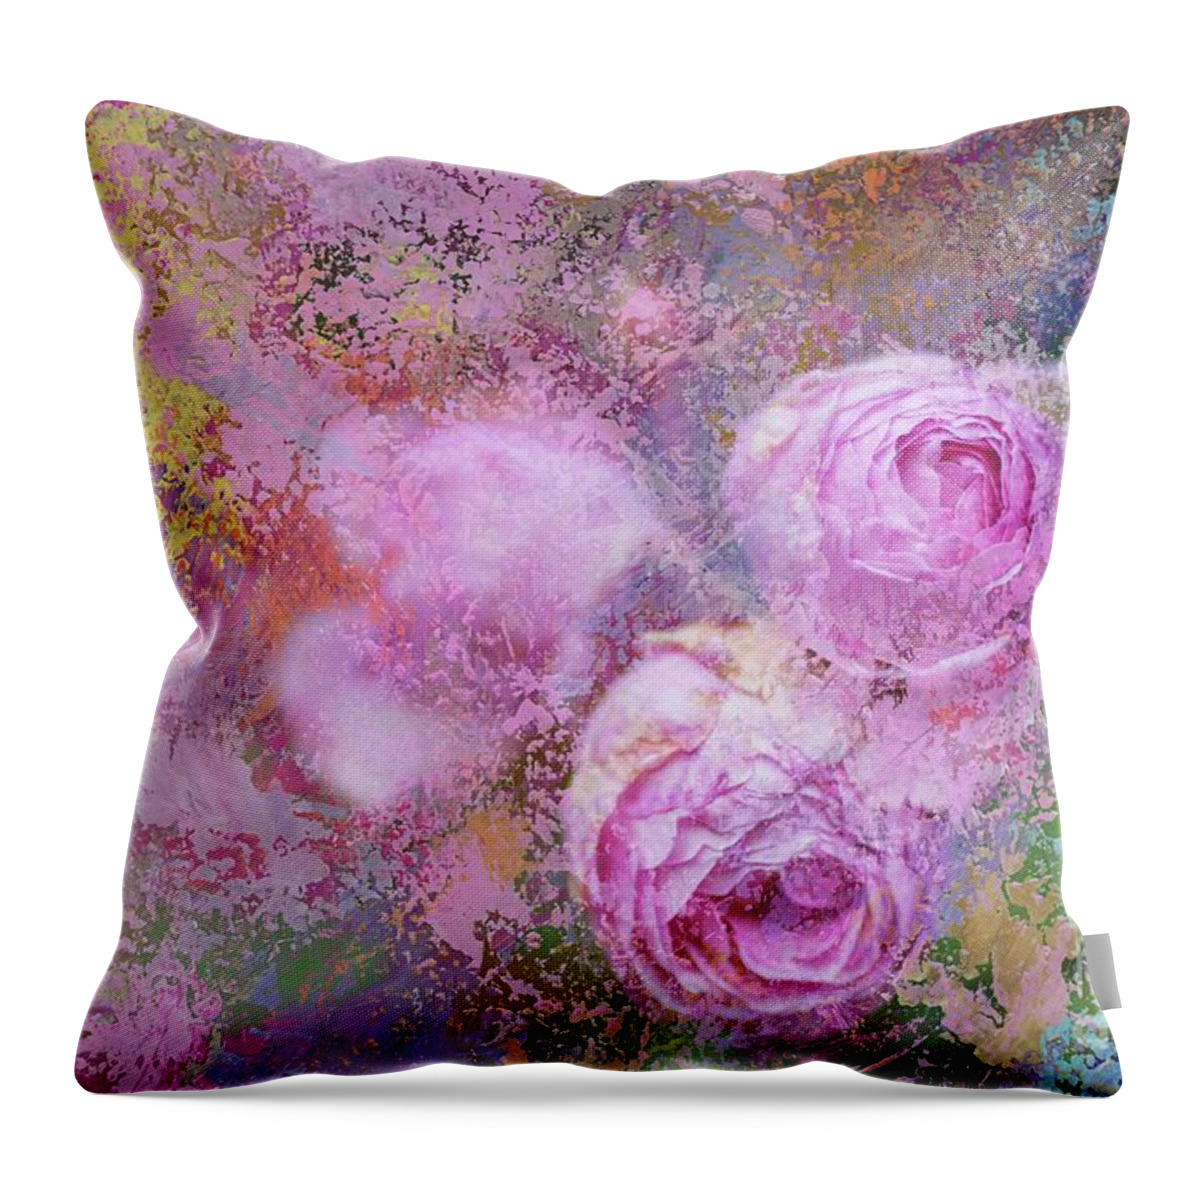 Roses Throw Pillow featuring the photograph Impressionnist Roses by Eva Lechner